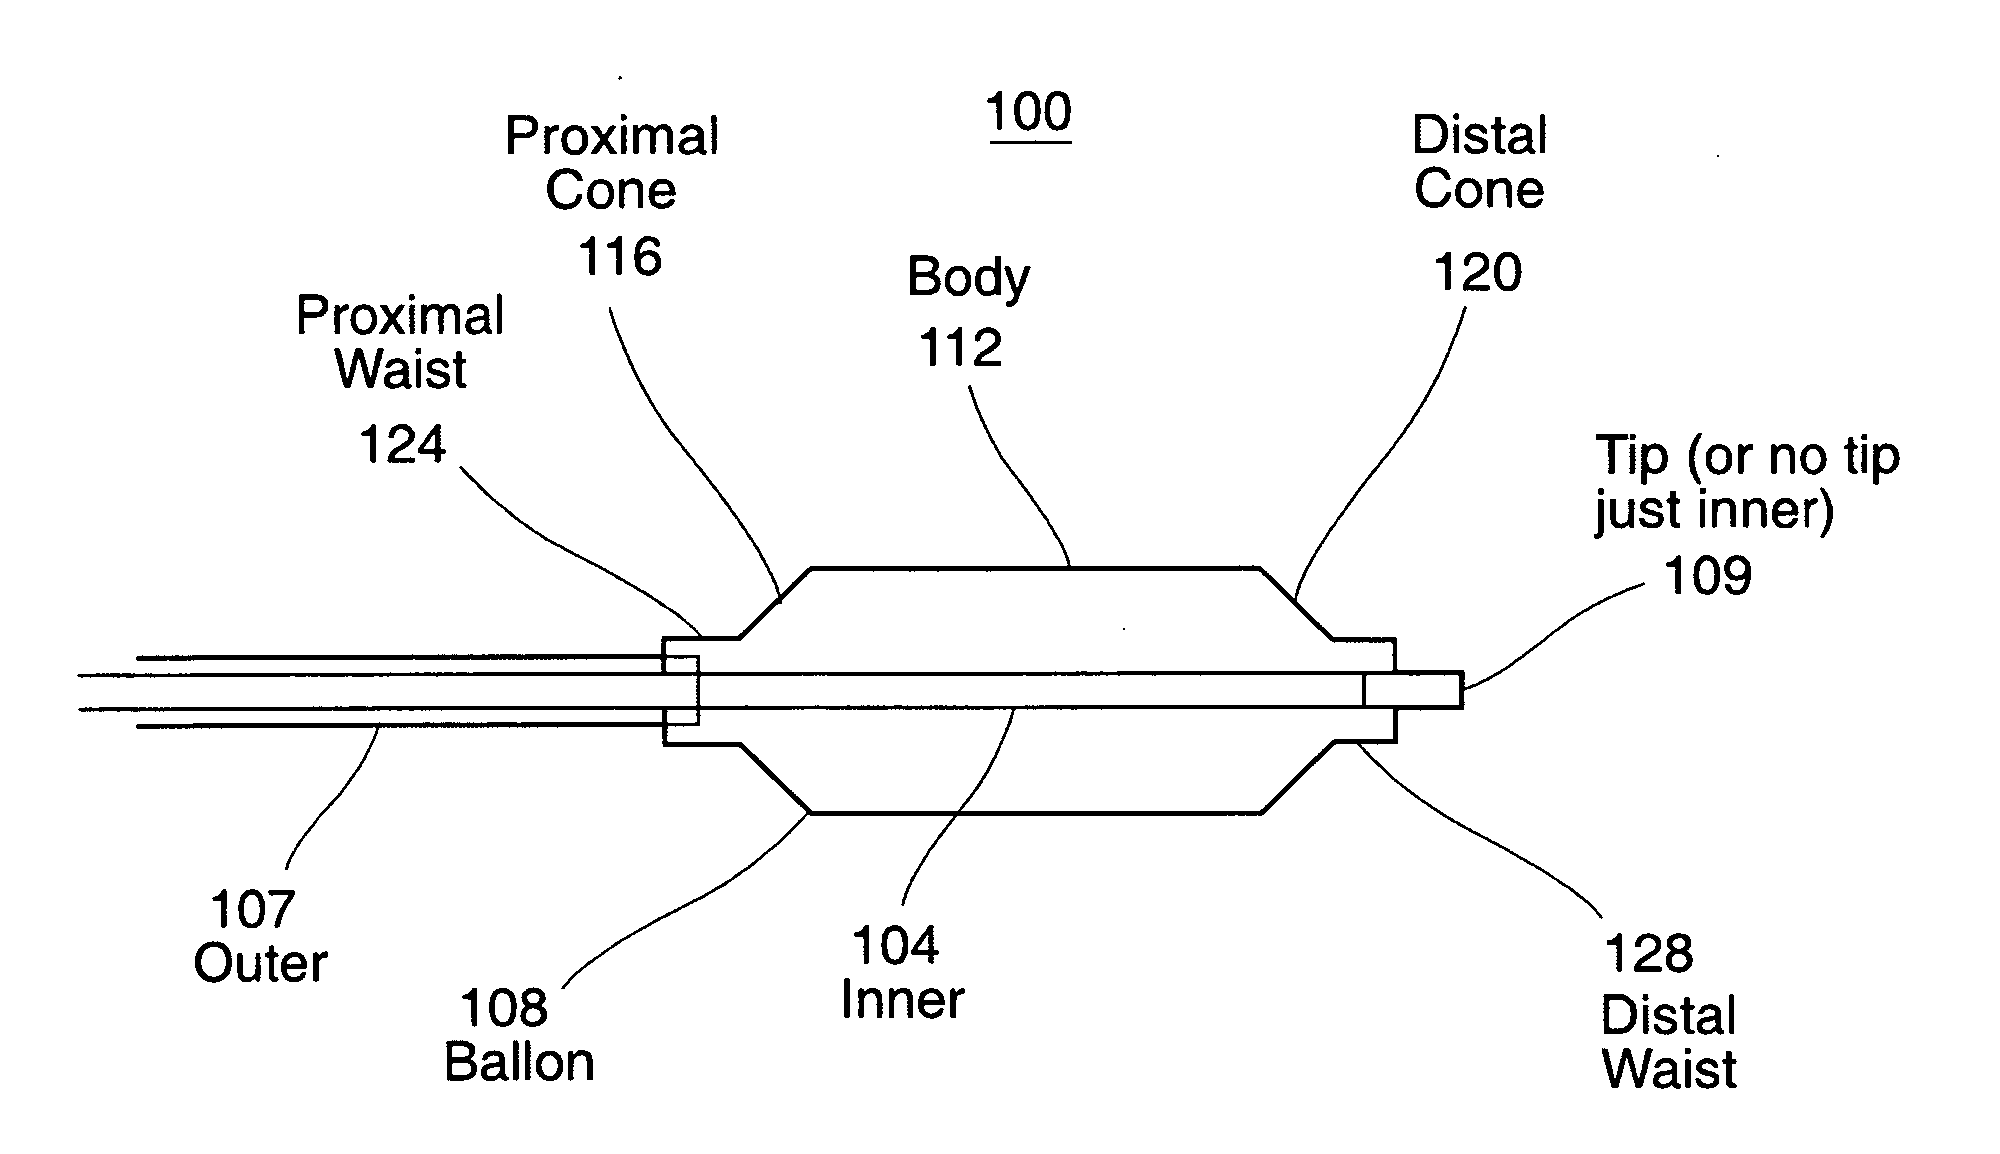 Method of applying one or more electromagnetic beams to form a fusion bond on a workpiece such as a medical device